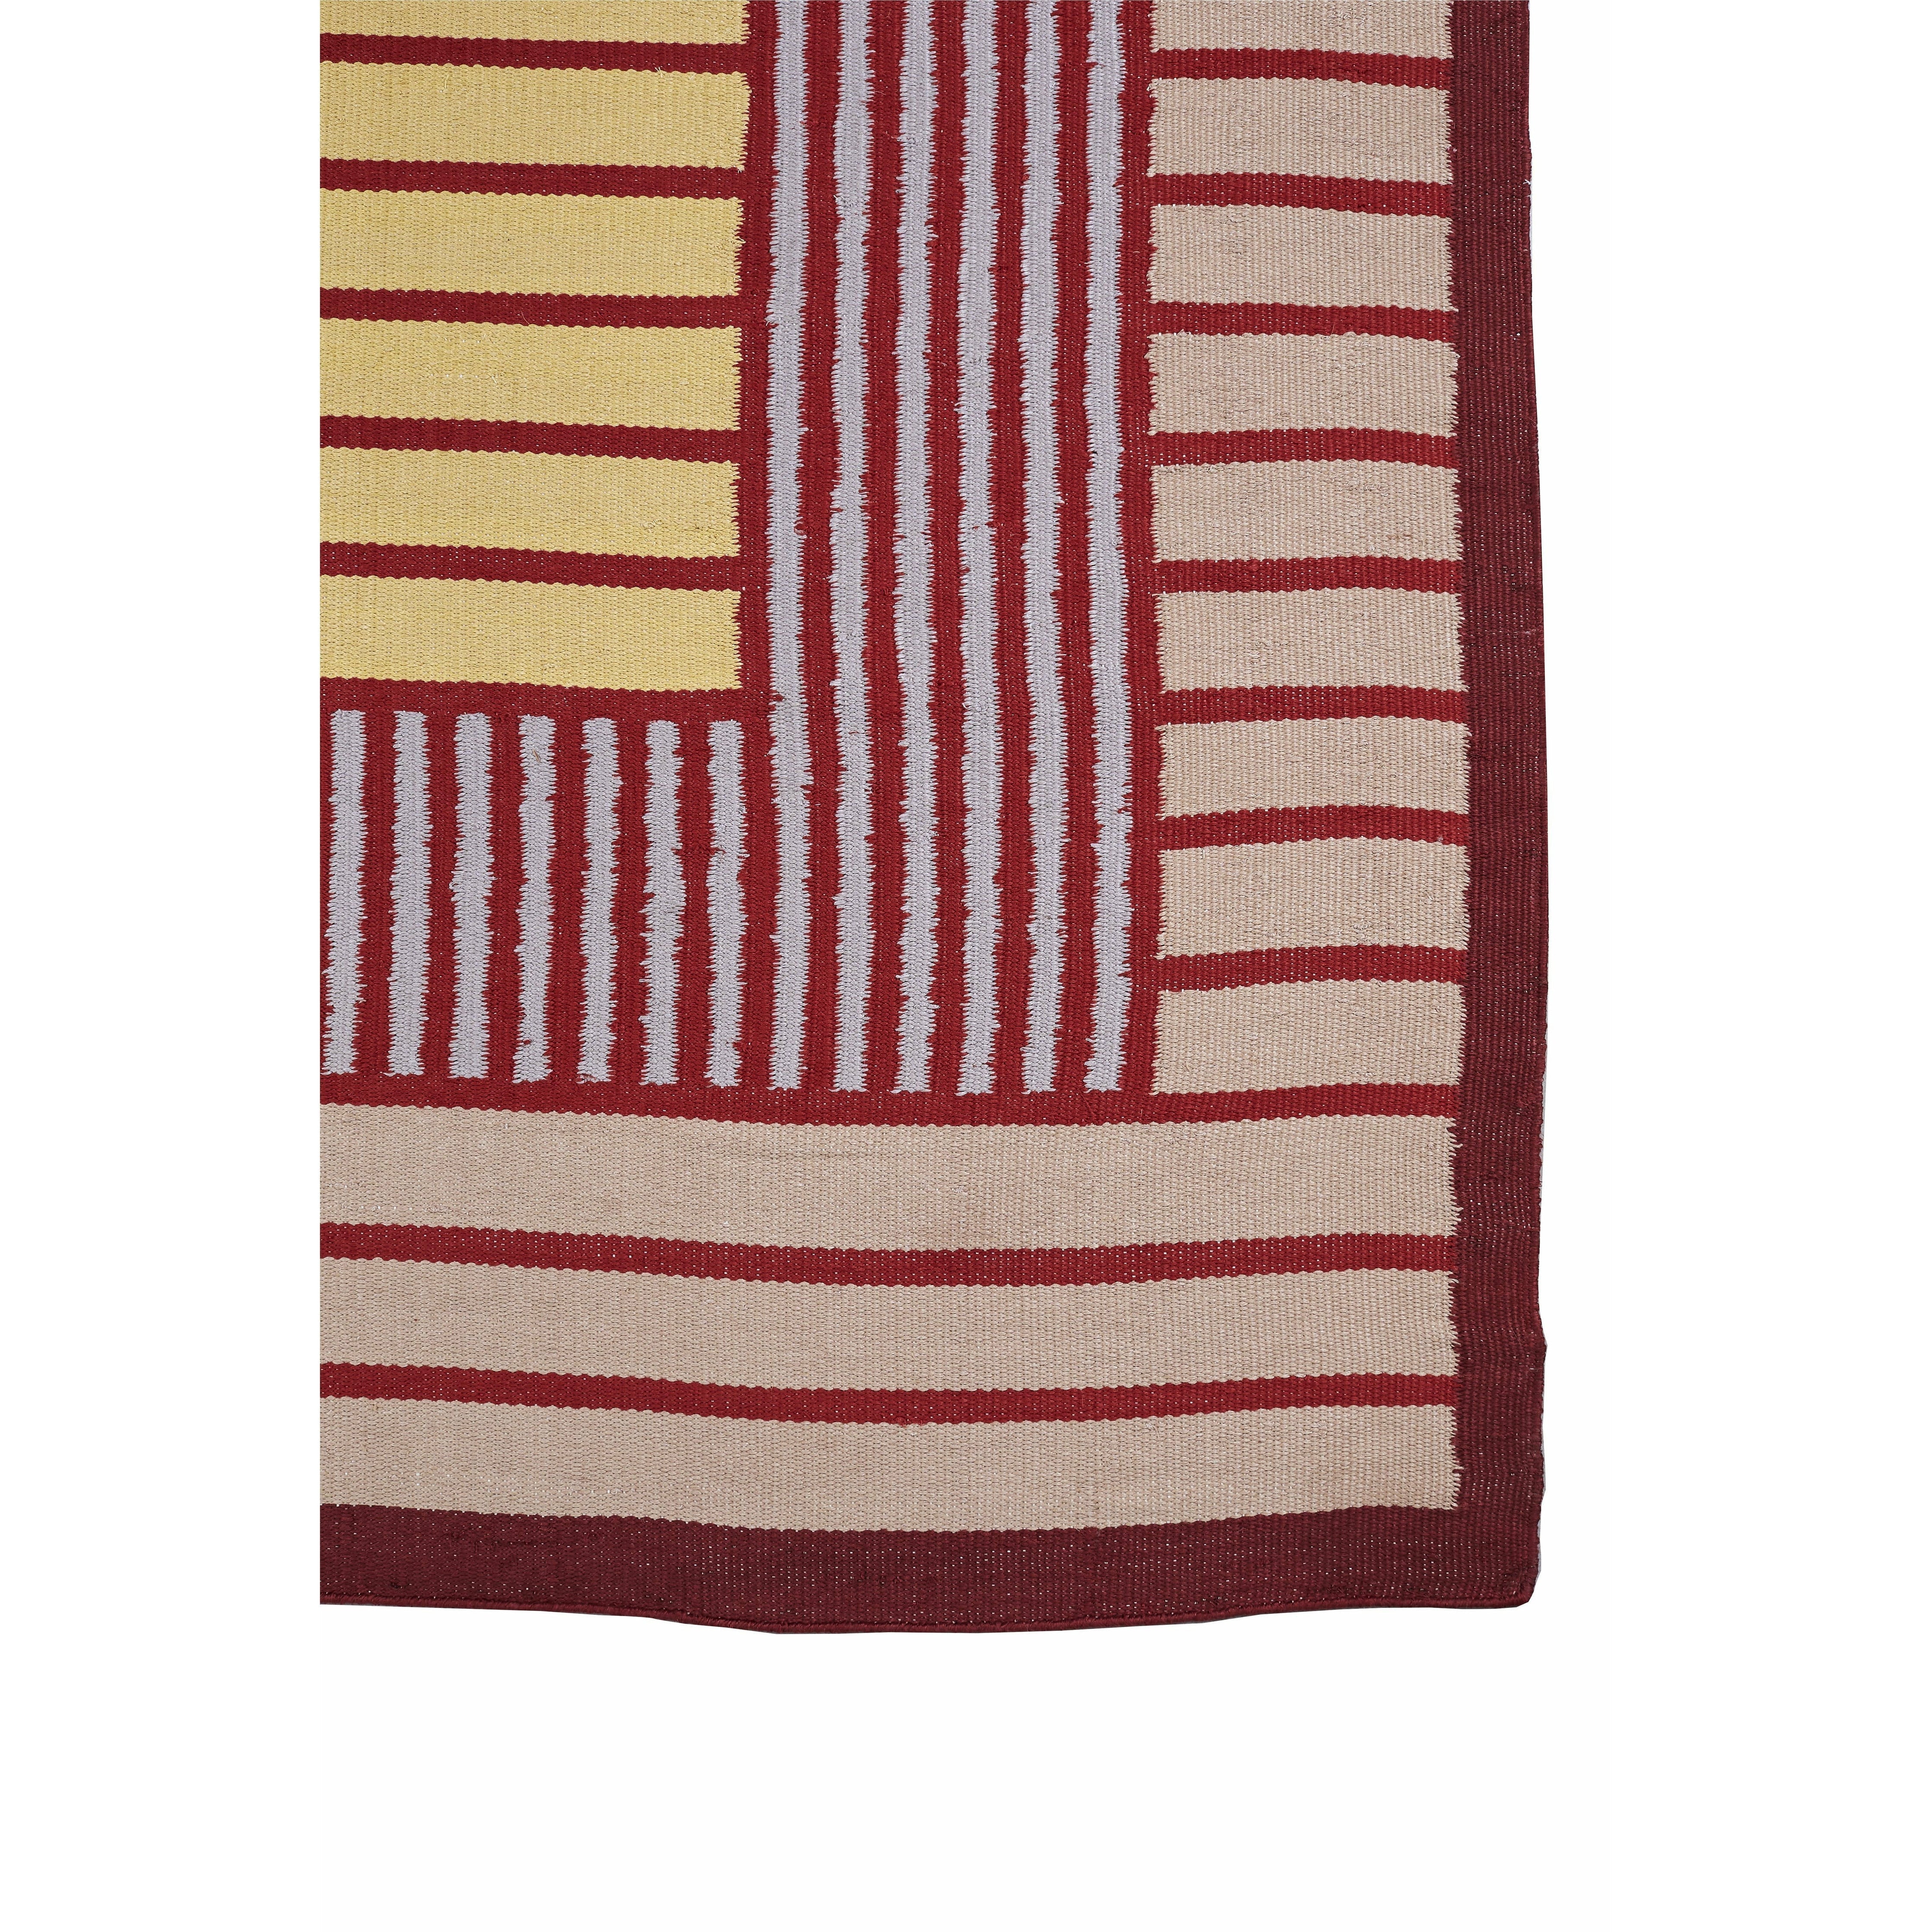 Massimo Hemp Collection By Tanja Kirst Rug 250x350, Red